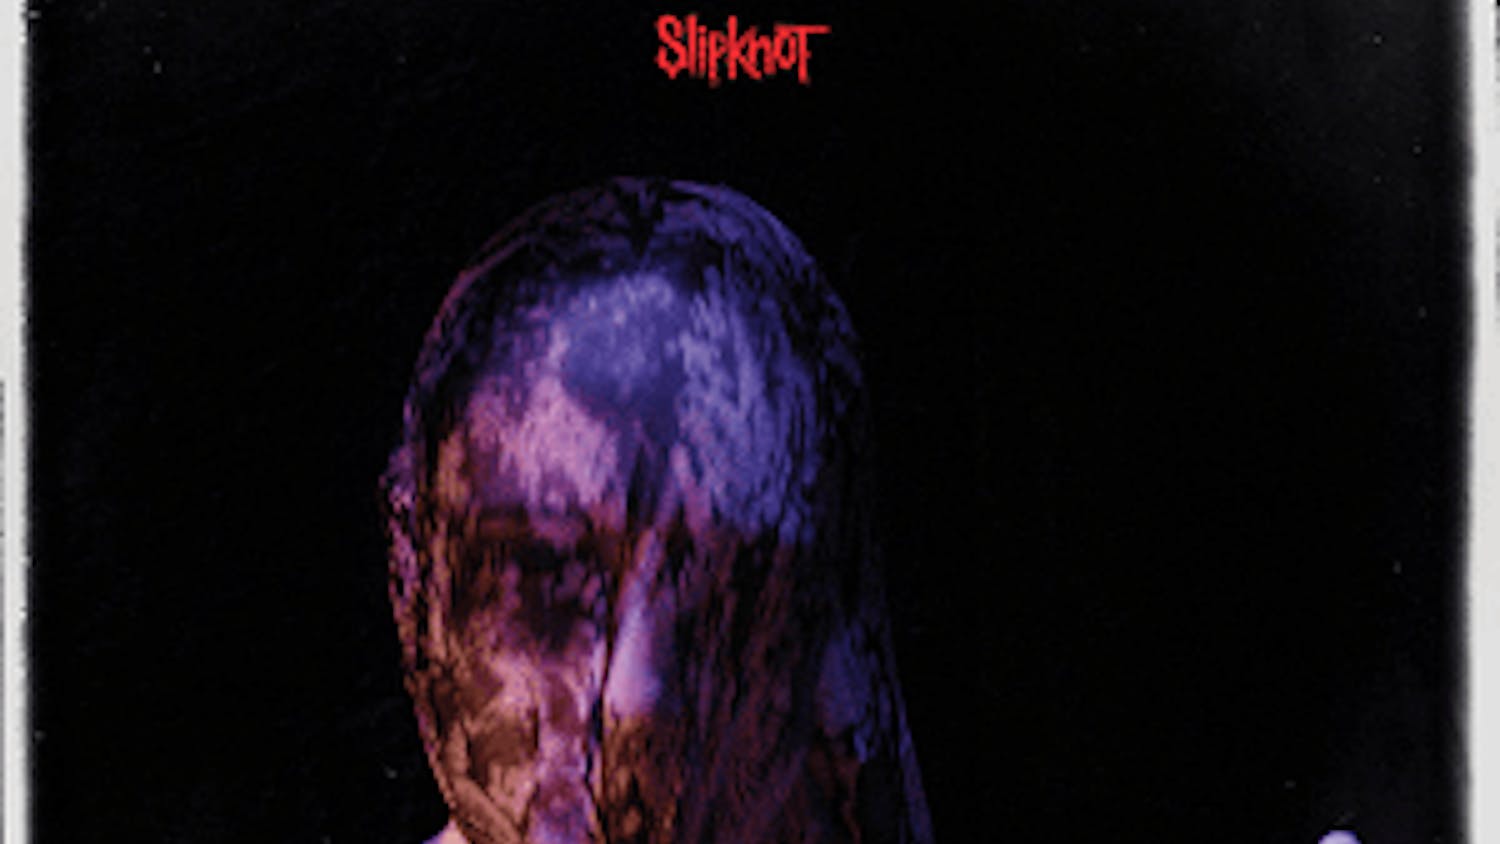 Slipknot_-_We_Are_Not_Your_Kind.png